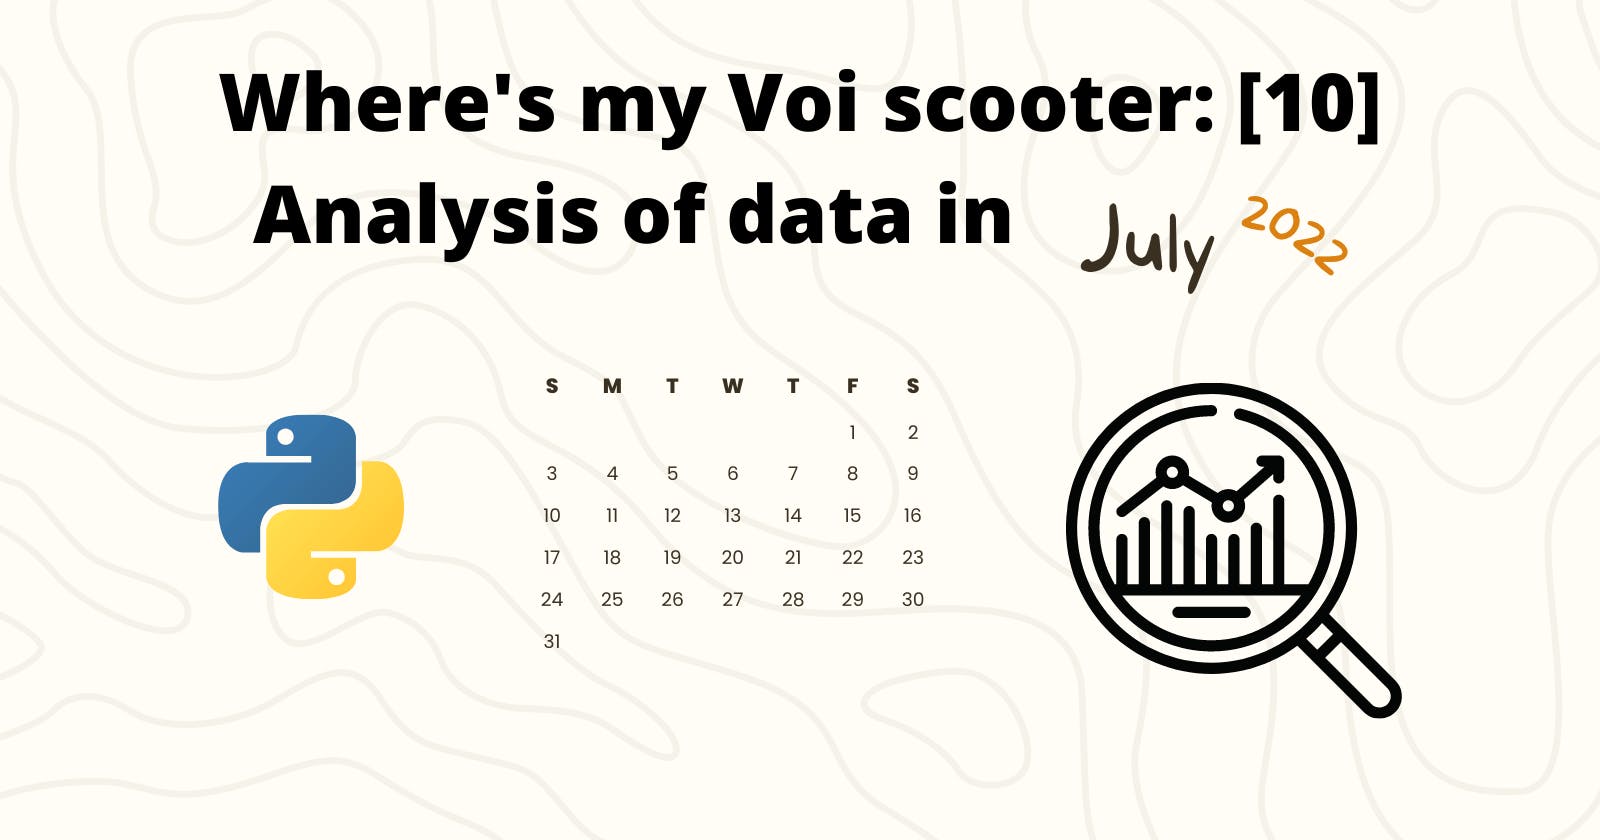 Where's my Voi scooter: [10] Analysis of data in July 2022